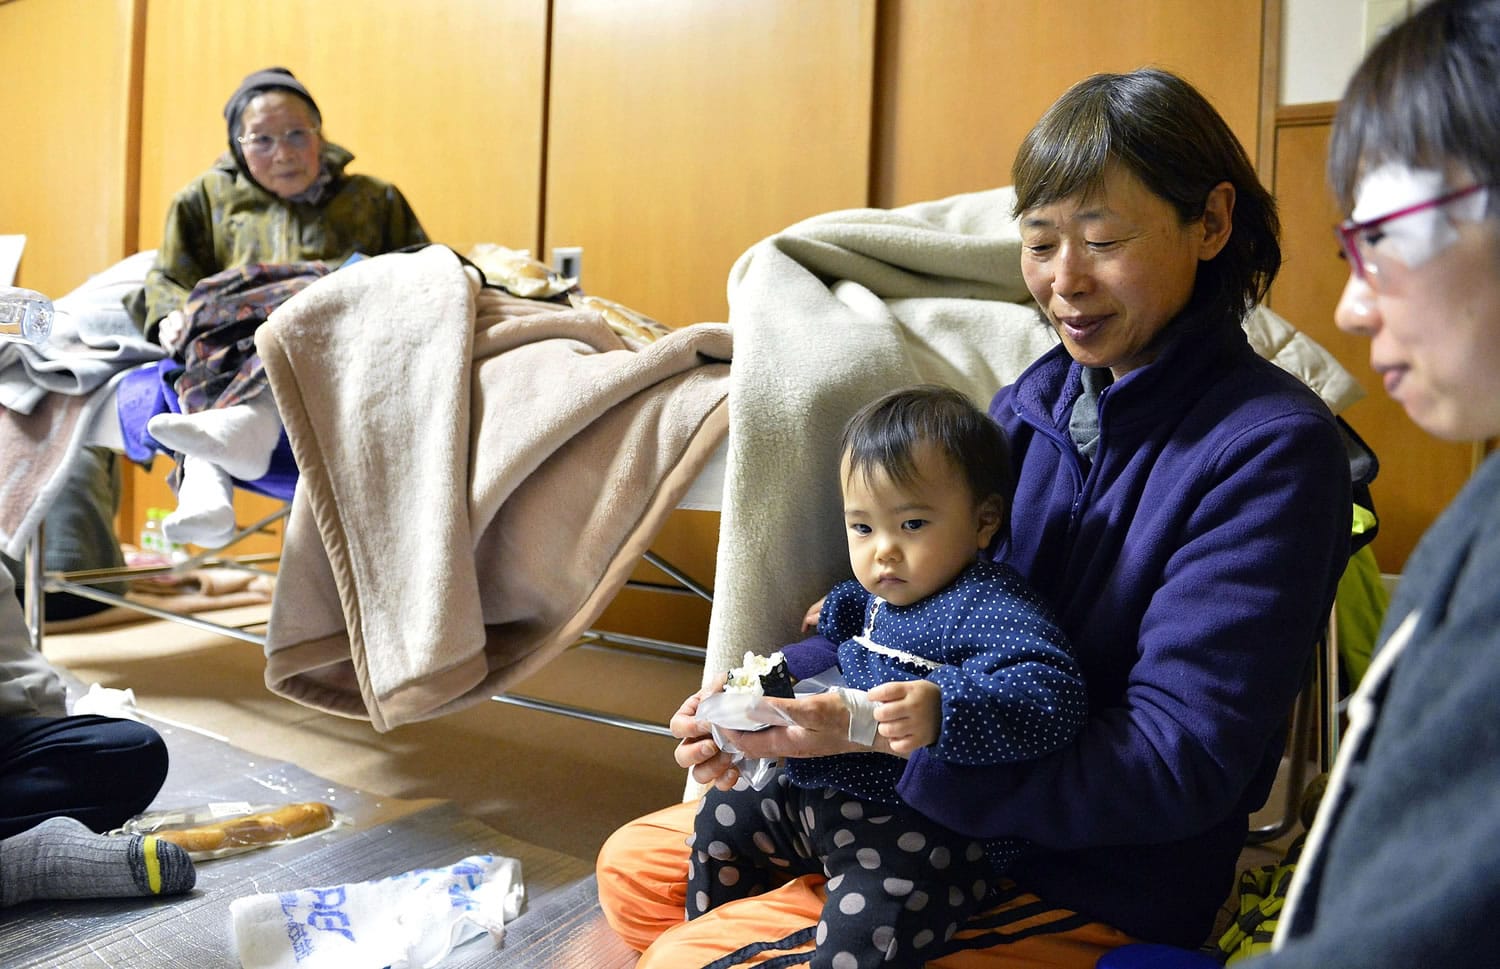 Evacuees have breakfast after spending a night at a shelter Sunday after a strong earthquake hit Hakuba, Nagano prefecture, central Japan, Saturday night.